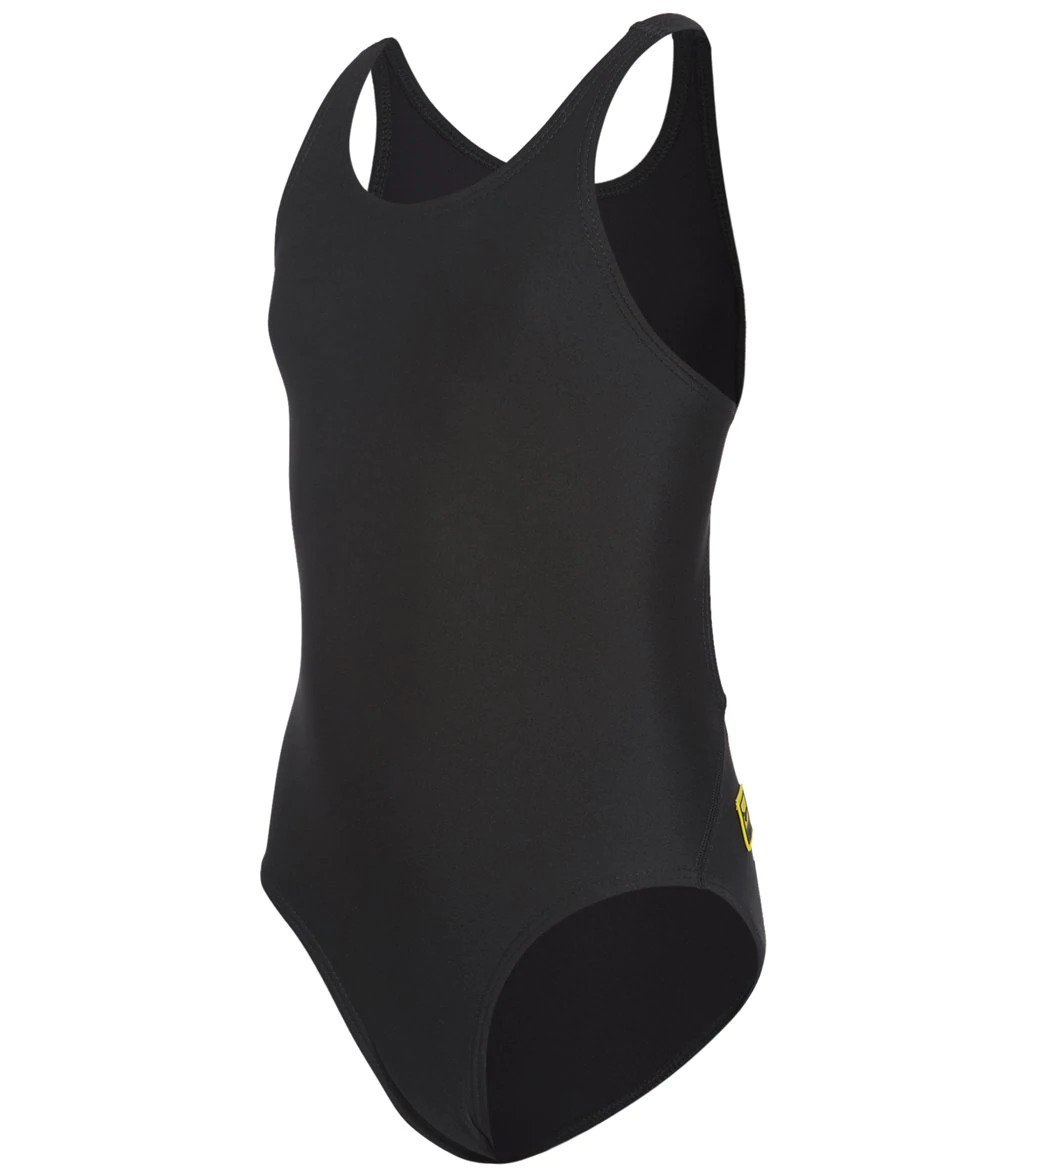 Women's Finis One Piece Suits